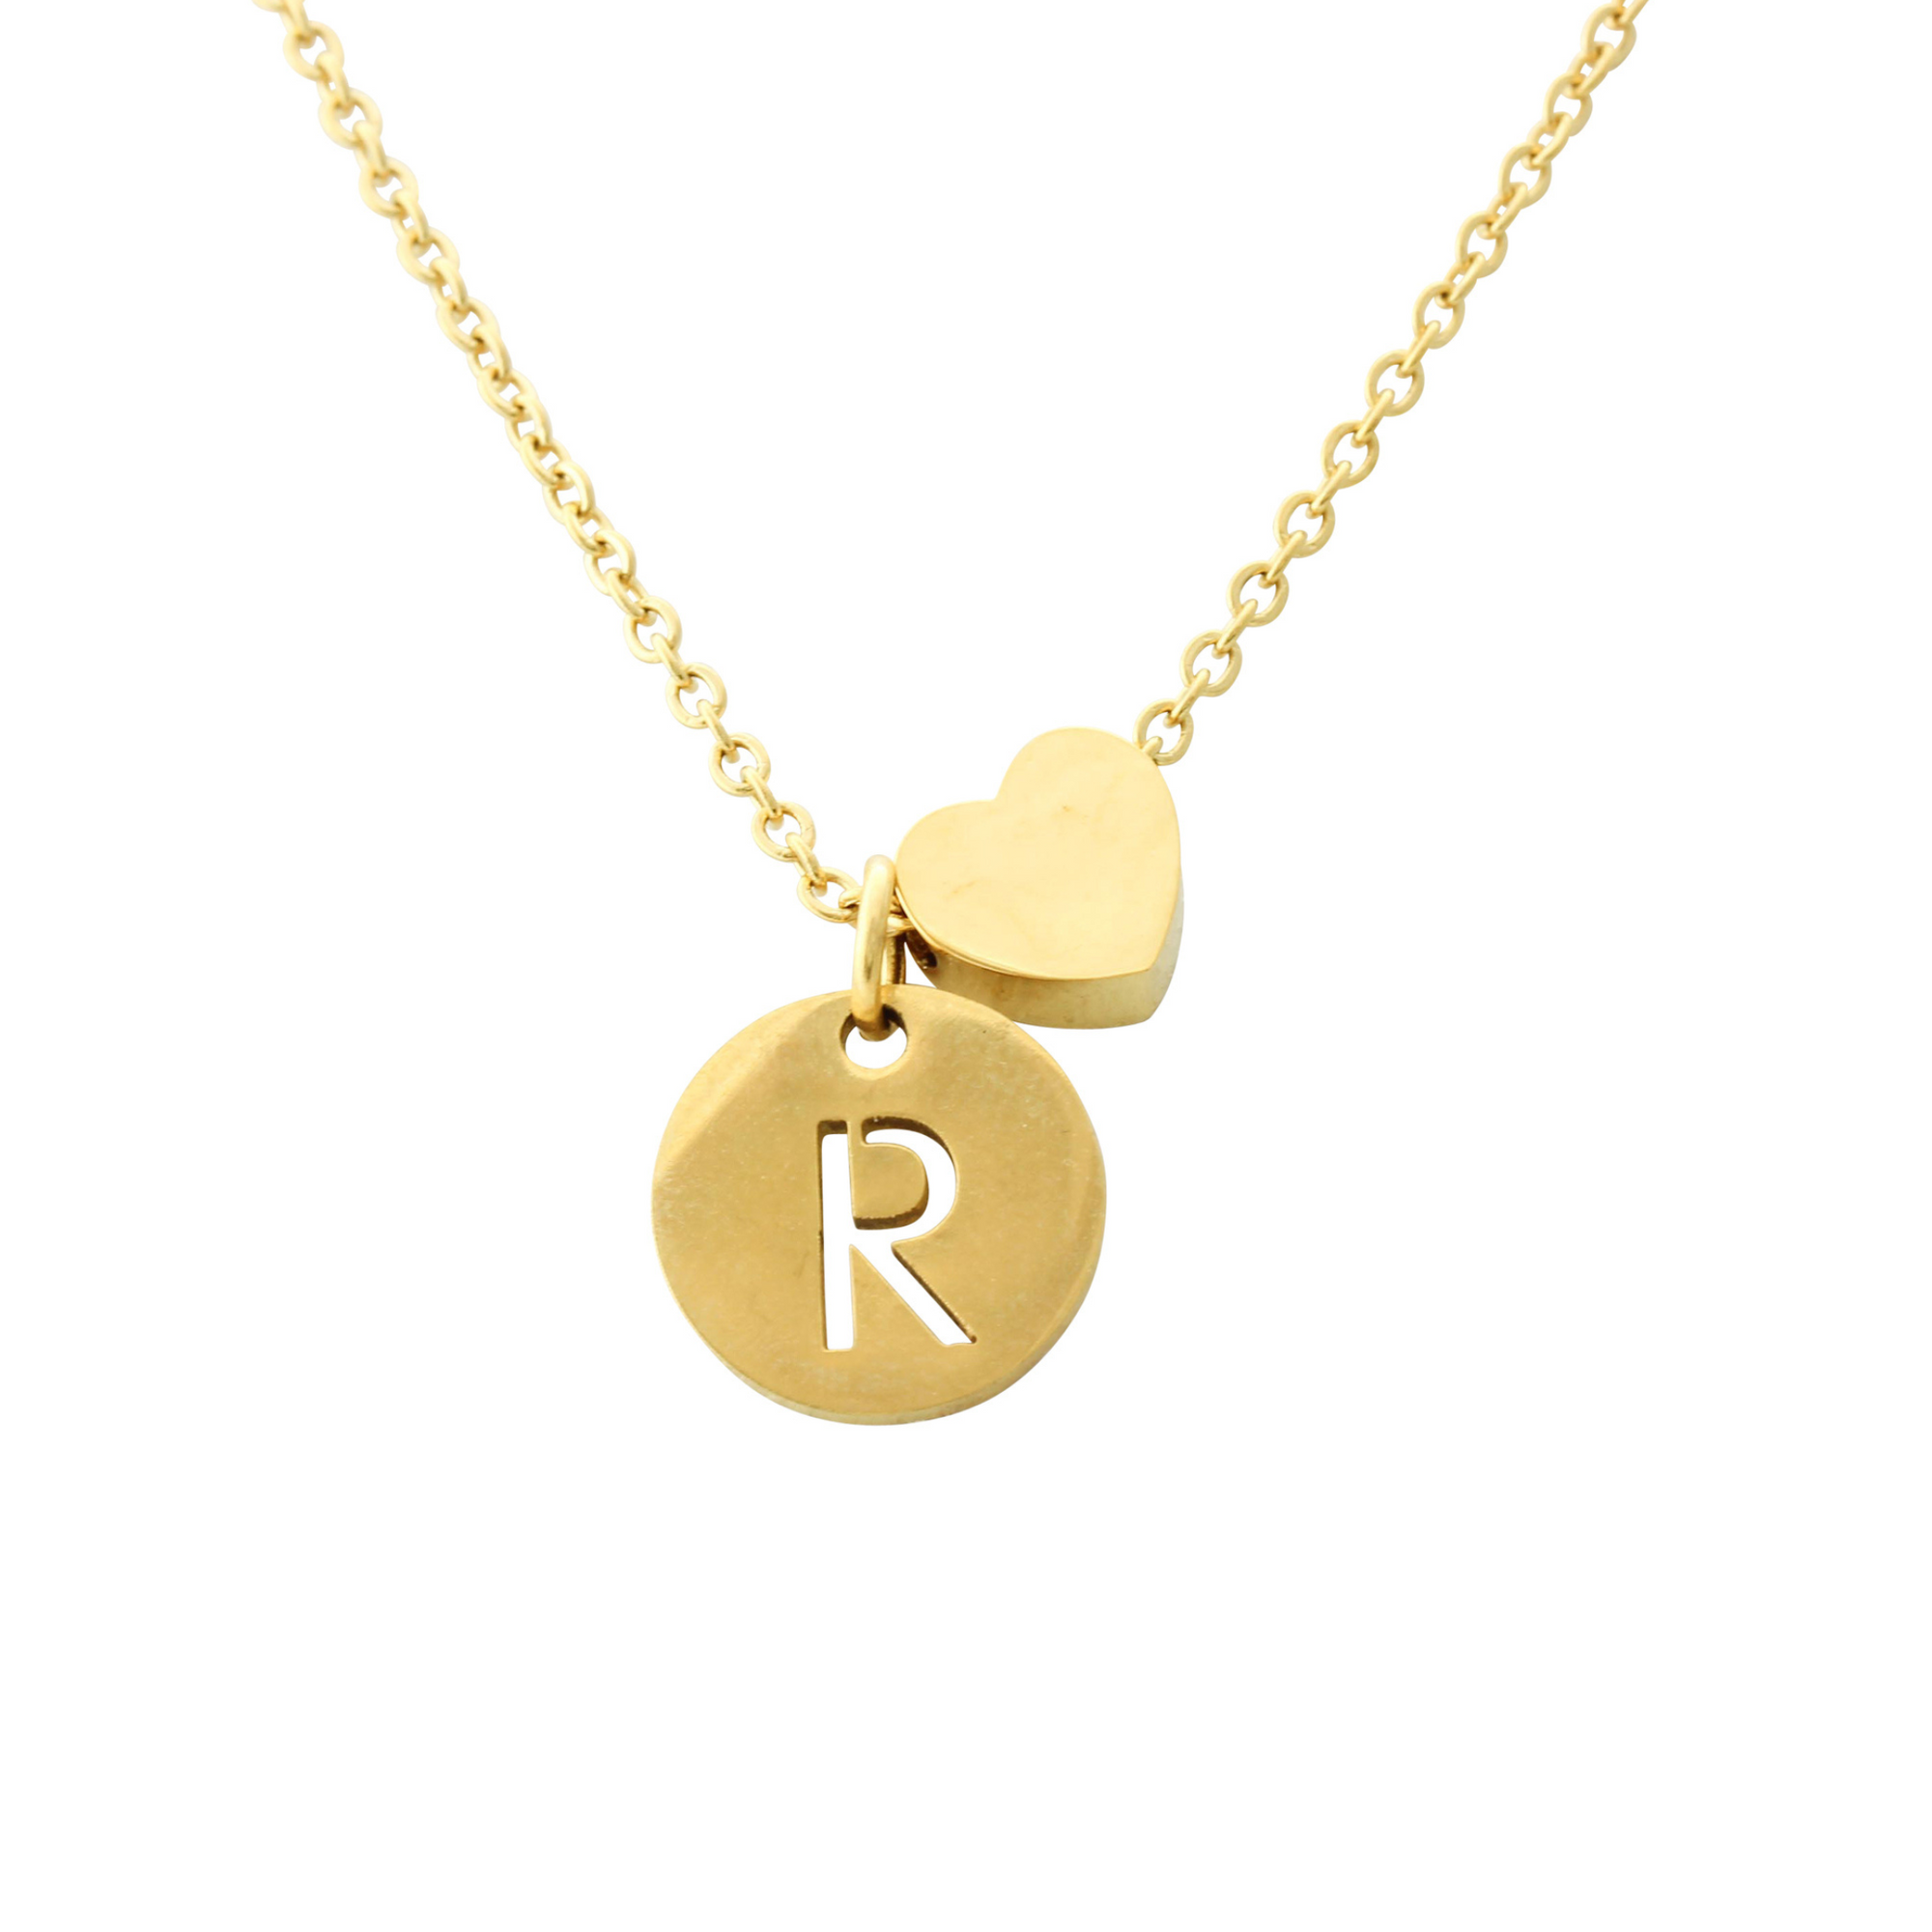 "Imperméable” Waterproof Personalized Initial Necklace with Heart - Gold/Gold